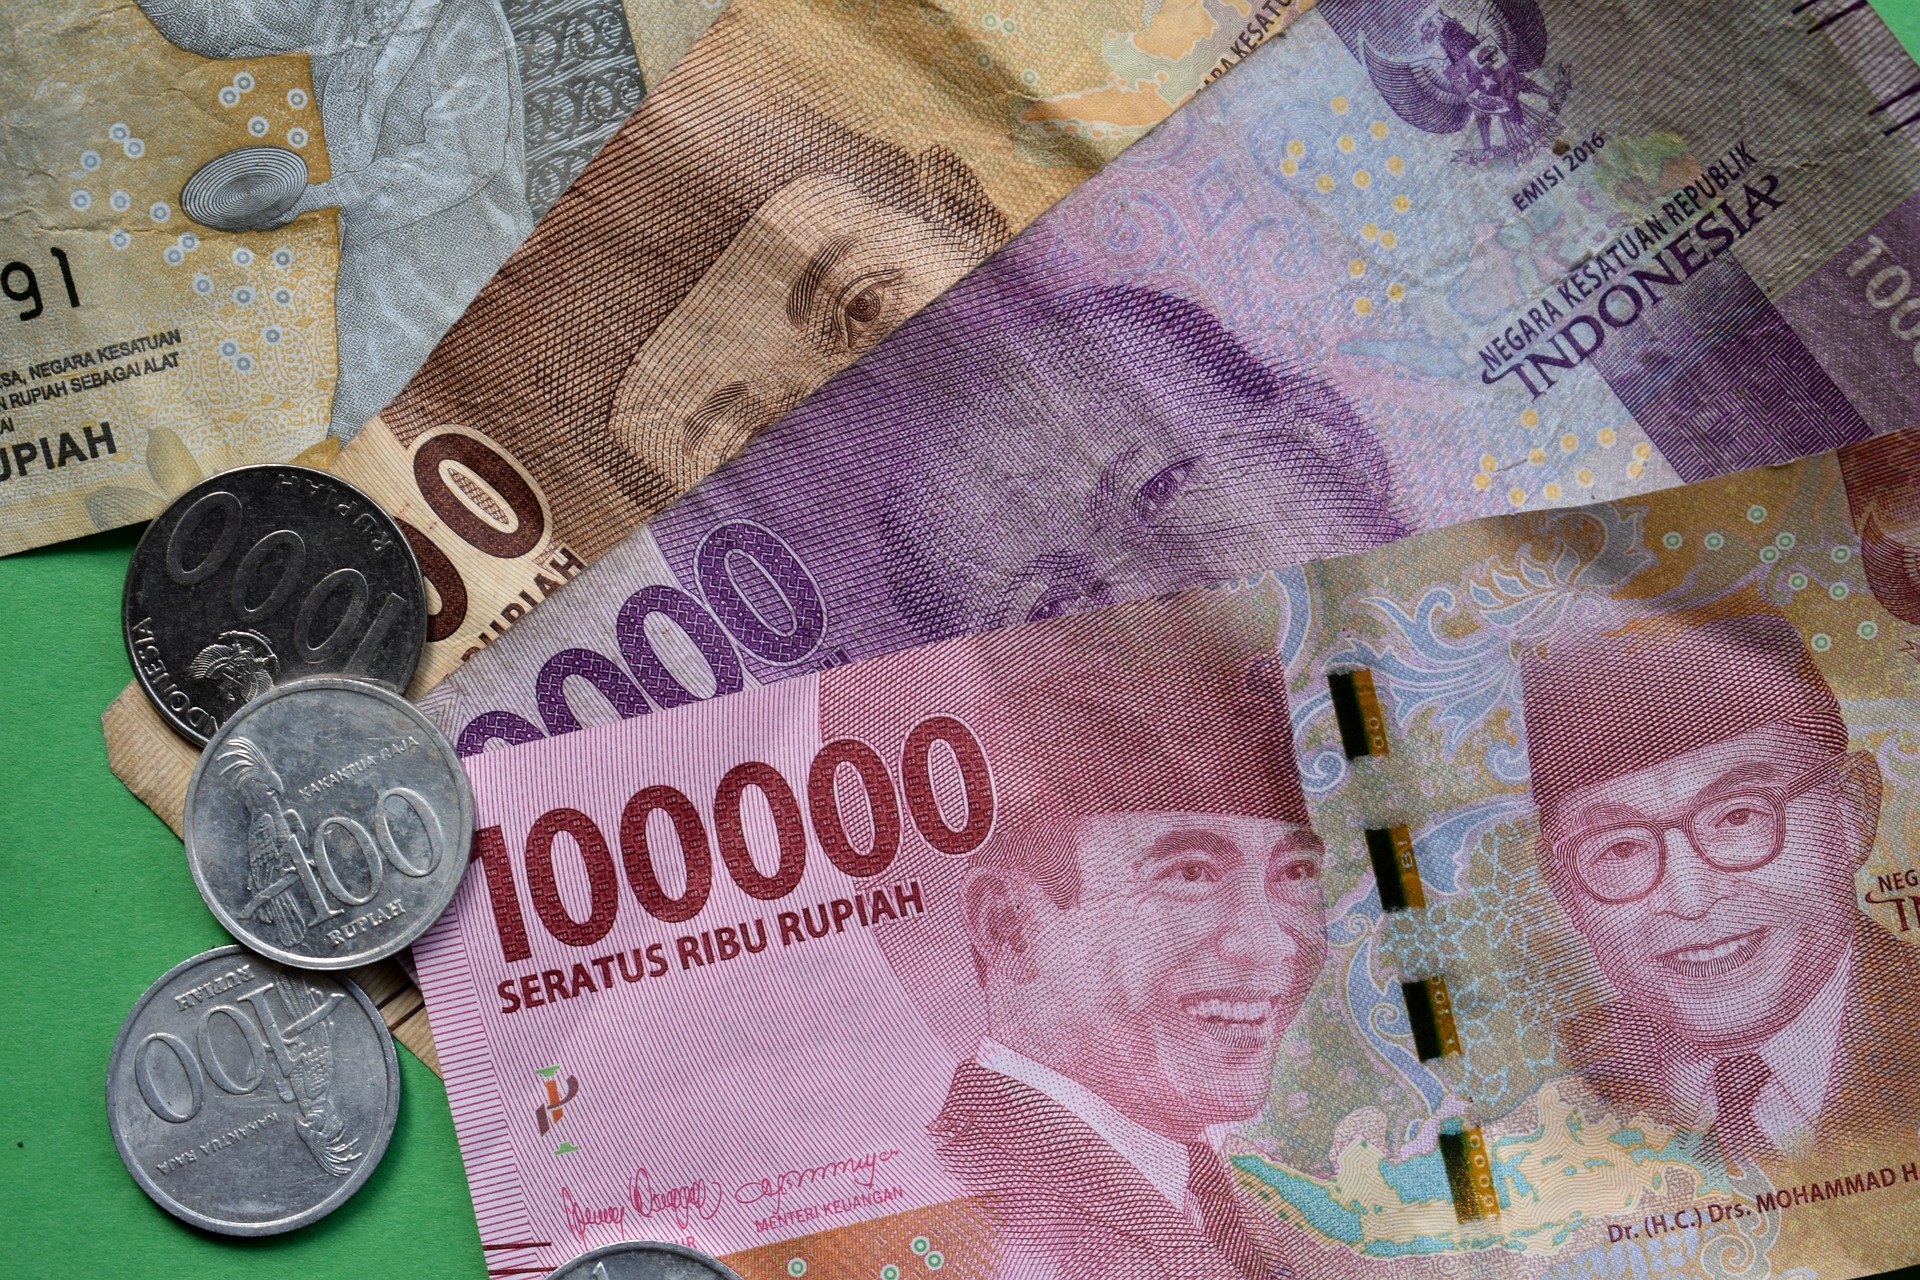 Indonesia’s money supply reaches 552.2 bln USD, influenced by credit distribution